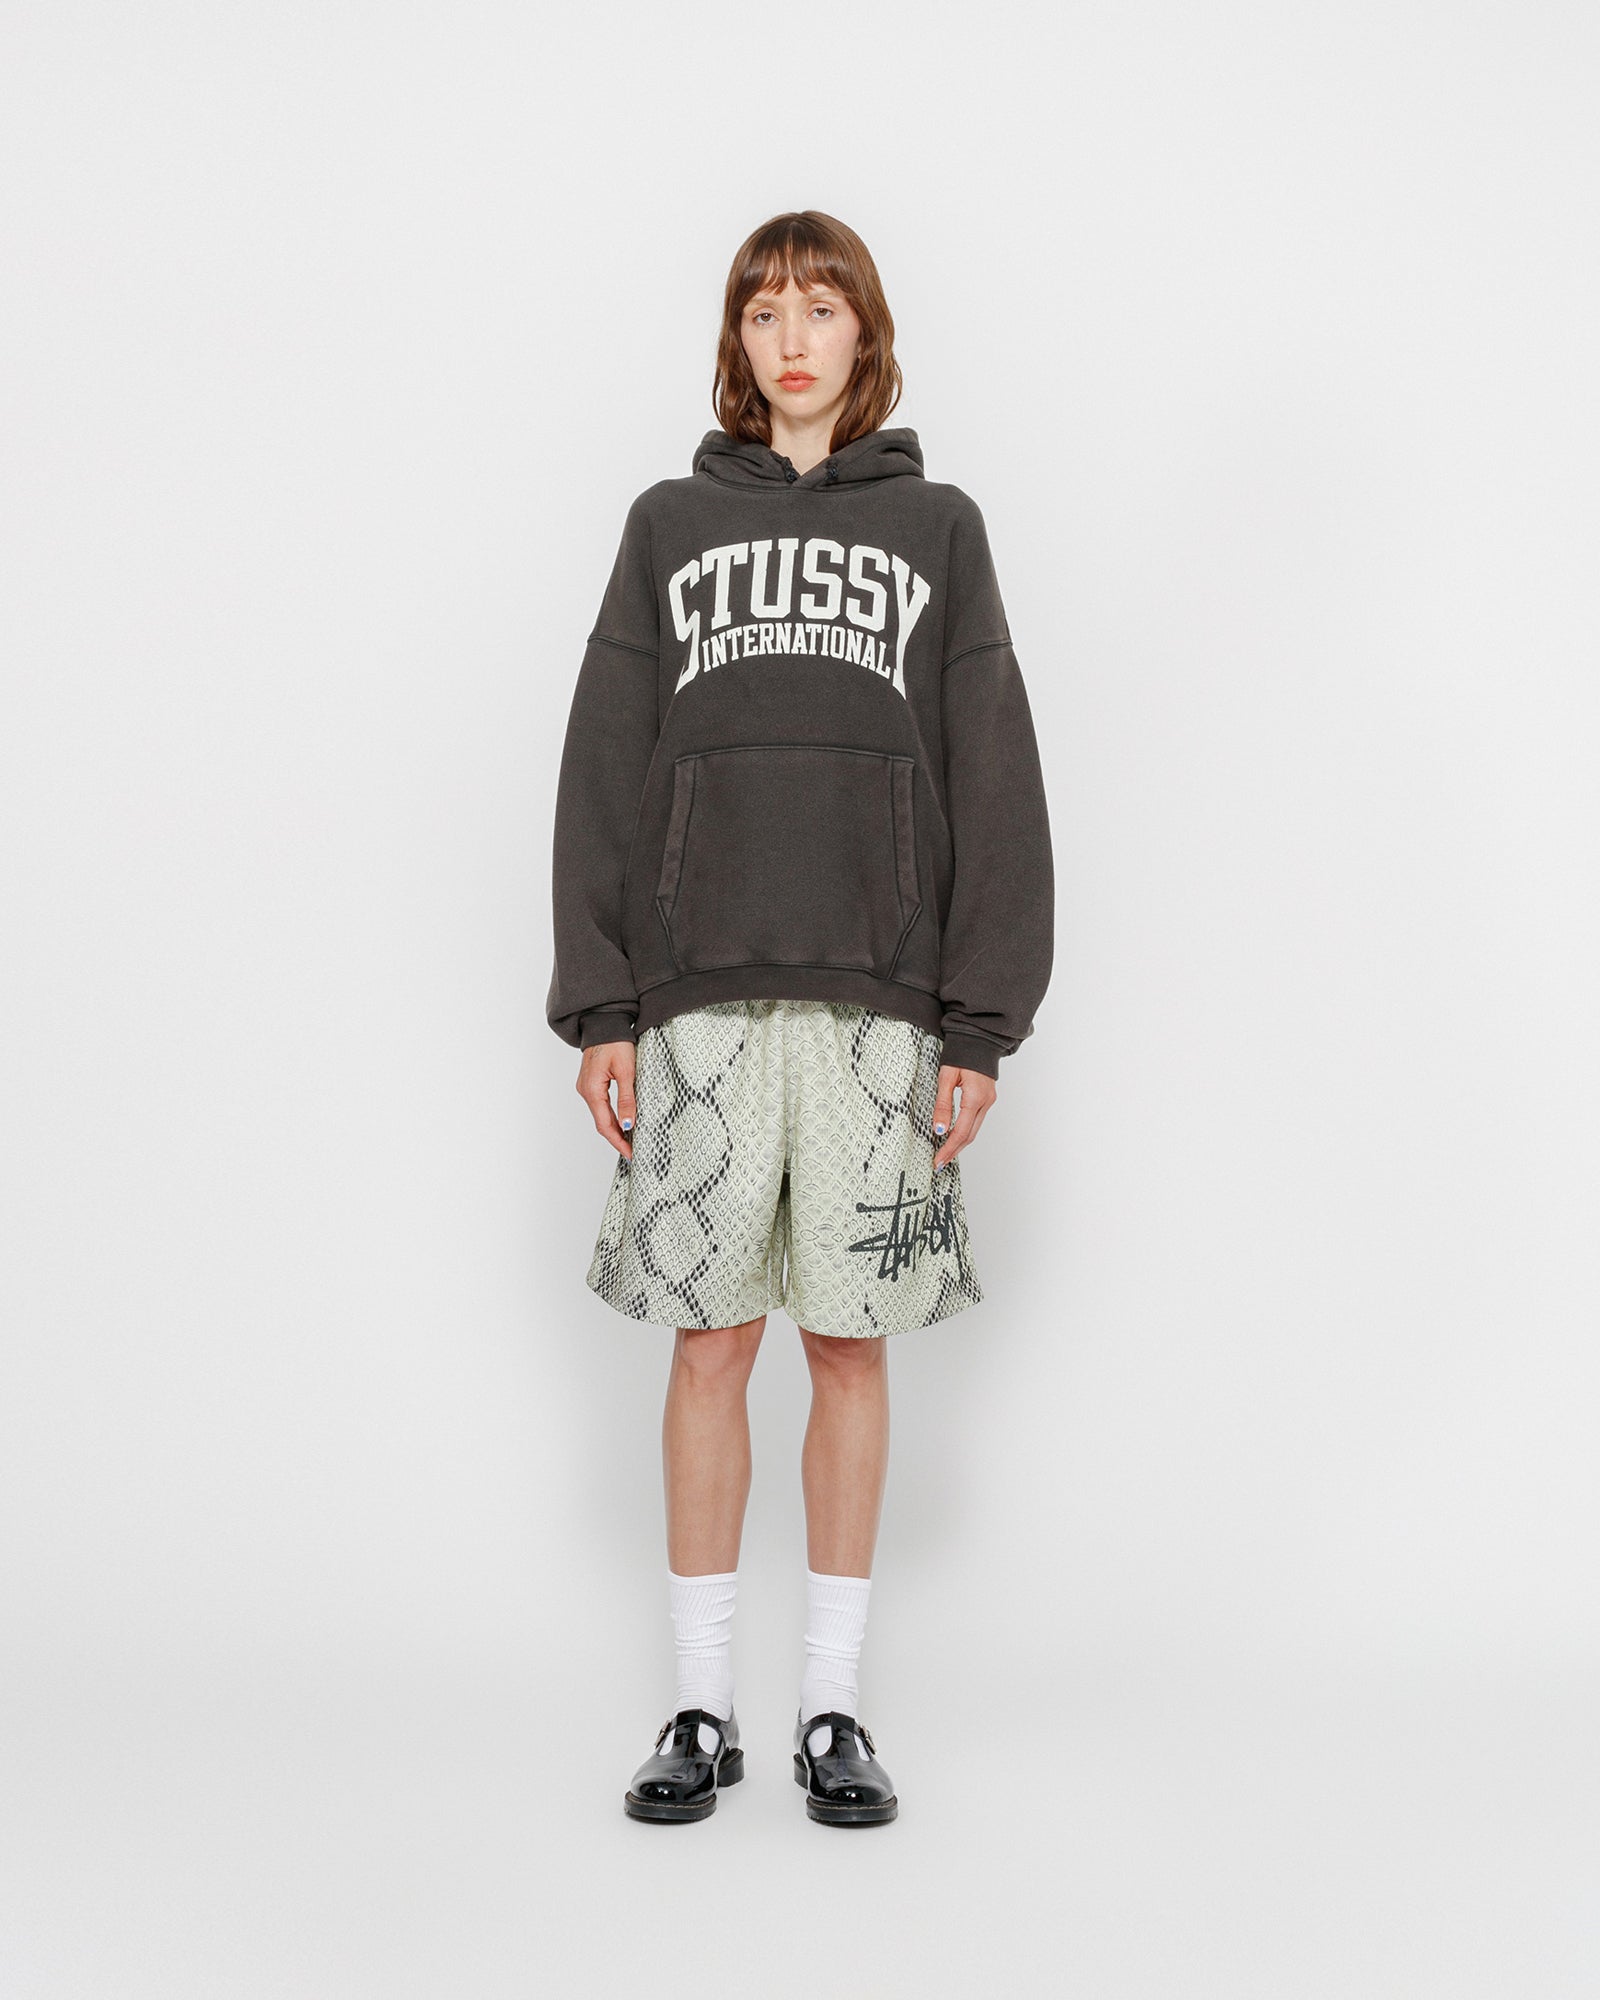 Stüssy Relaxed Hoodie International Washed Black Sweats